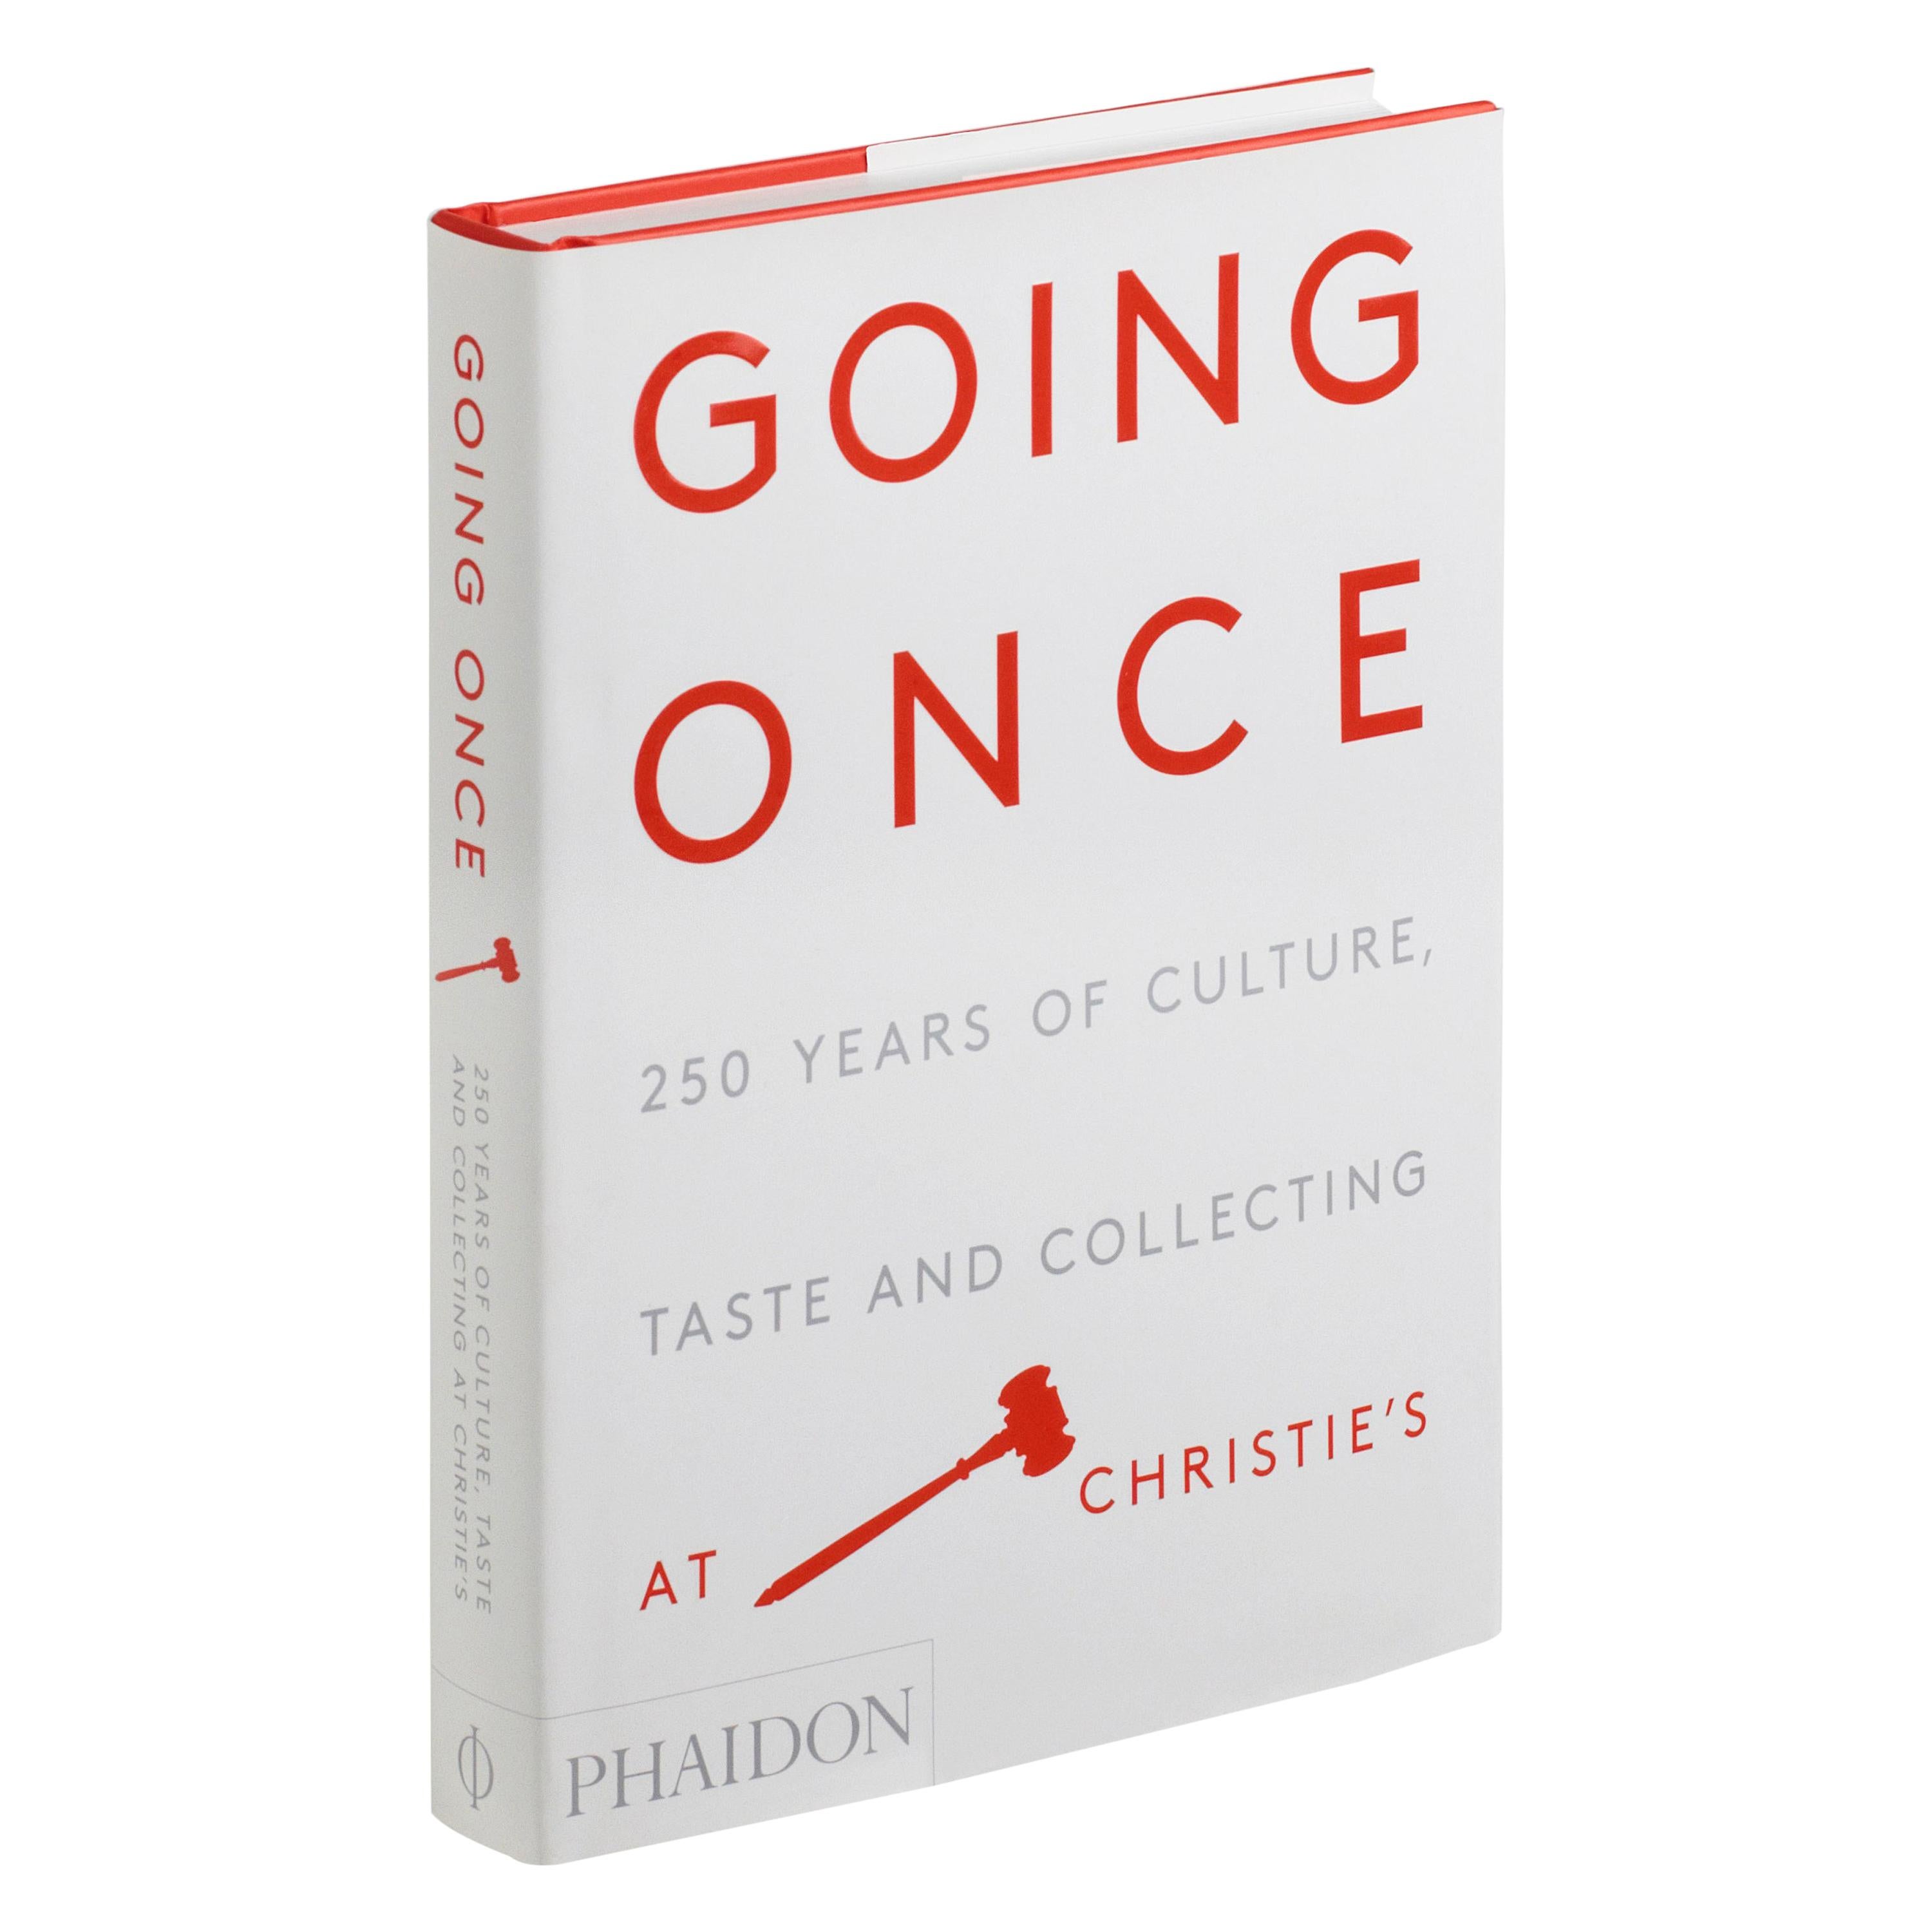 Going Once, 250 Years of Culture, Taste and Collecting at Christie’s